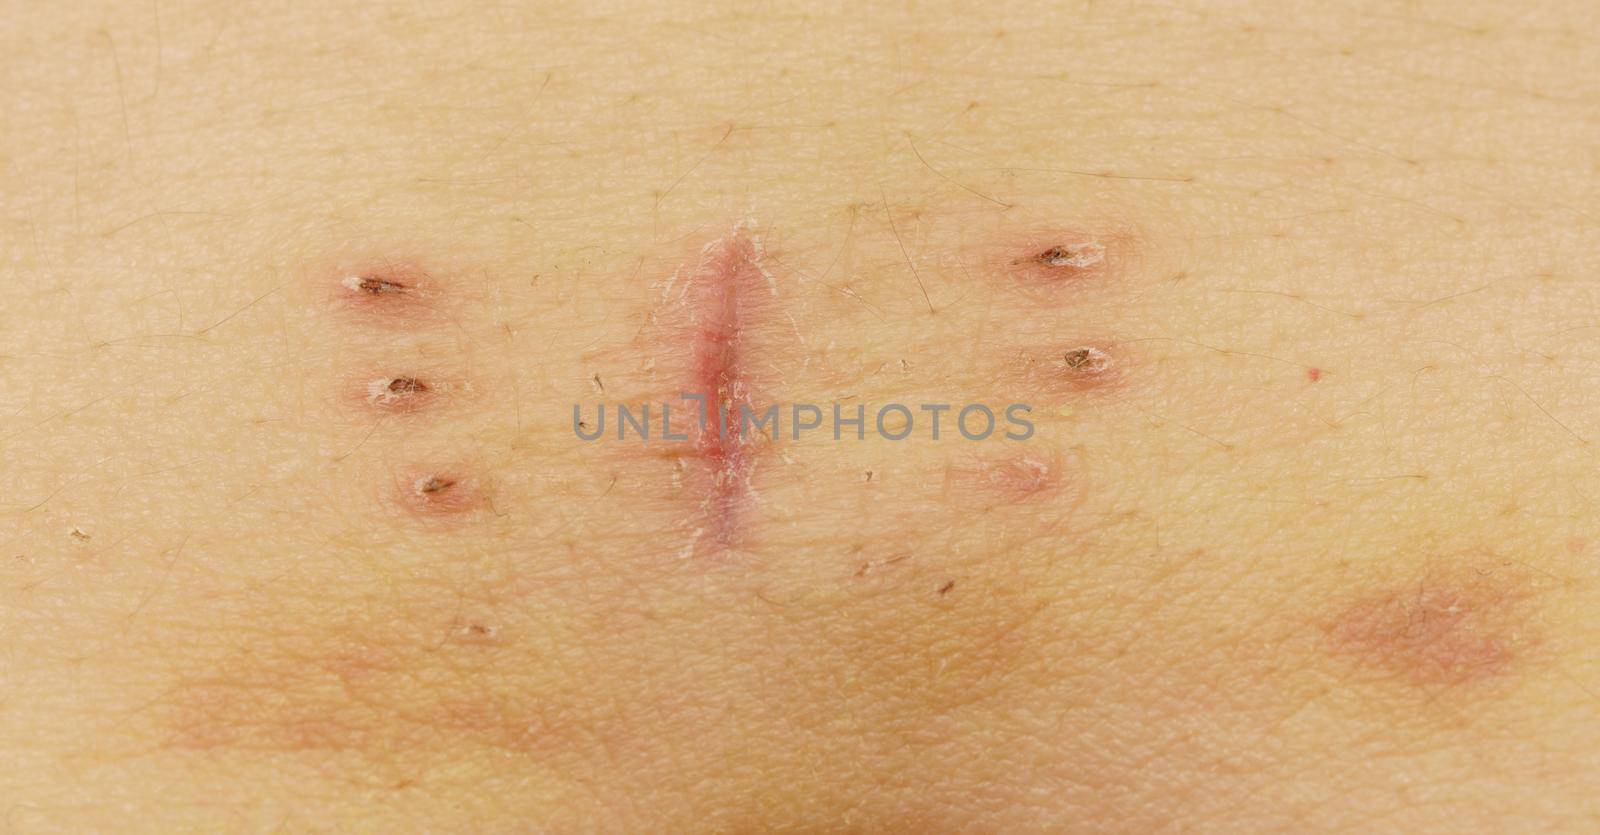 Scar with bruise closeup after hysterectomy by FerradalFCG